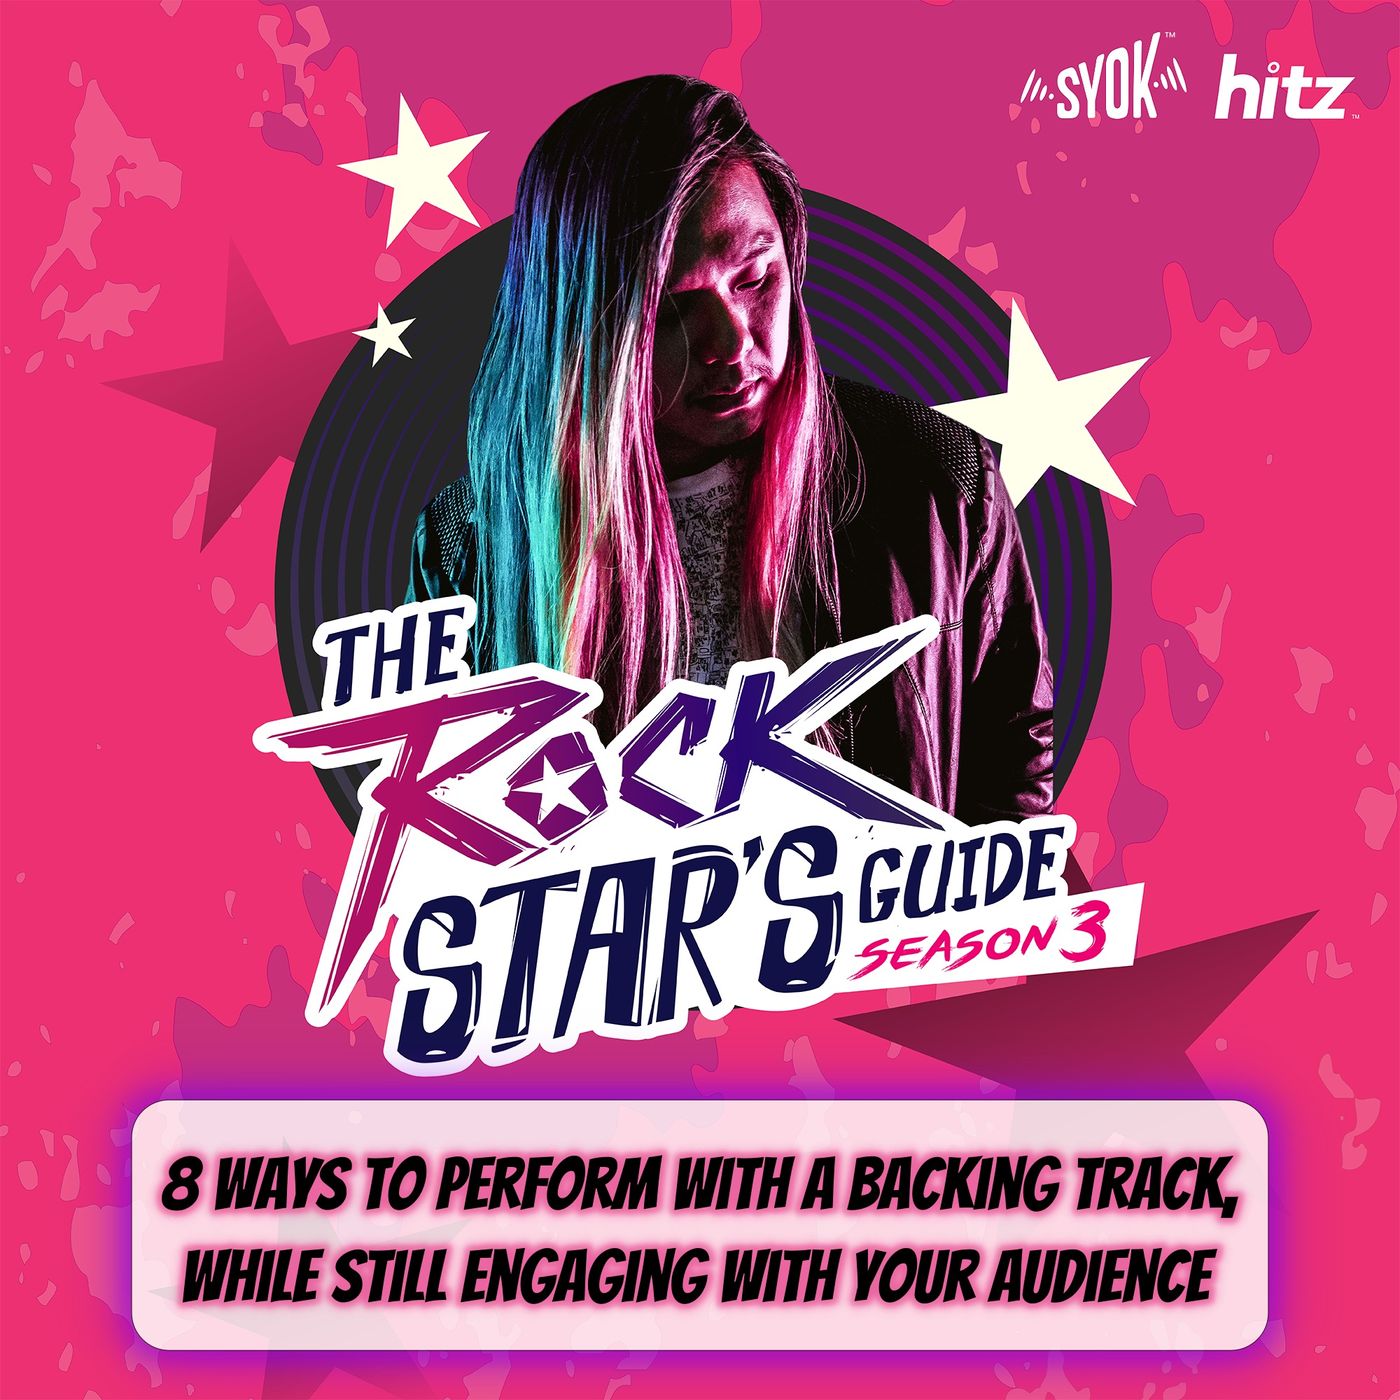 8 Ways to Perform With a Backing Track (and Still Engaging With Your Audience) | The Rockstar's Guide S3E15